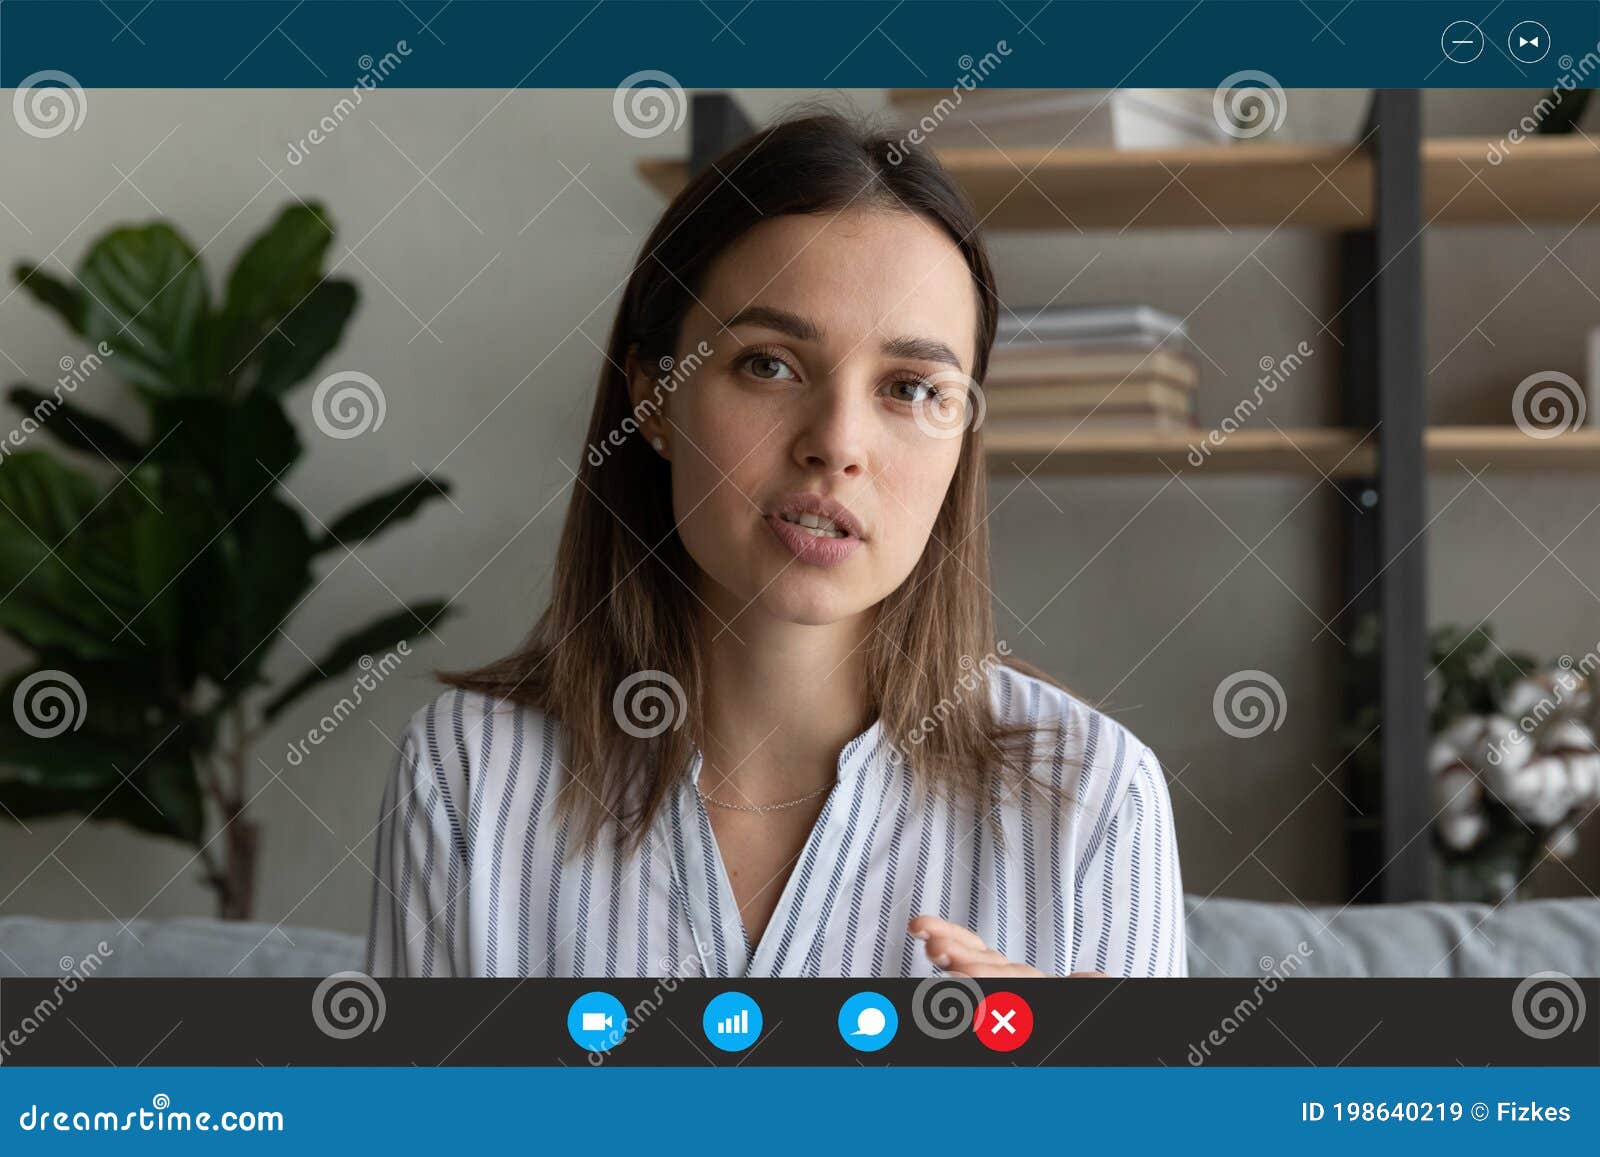 motivated woman talk on video call from home